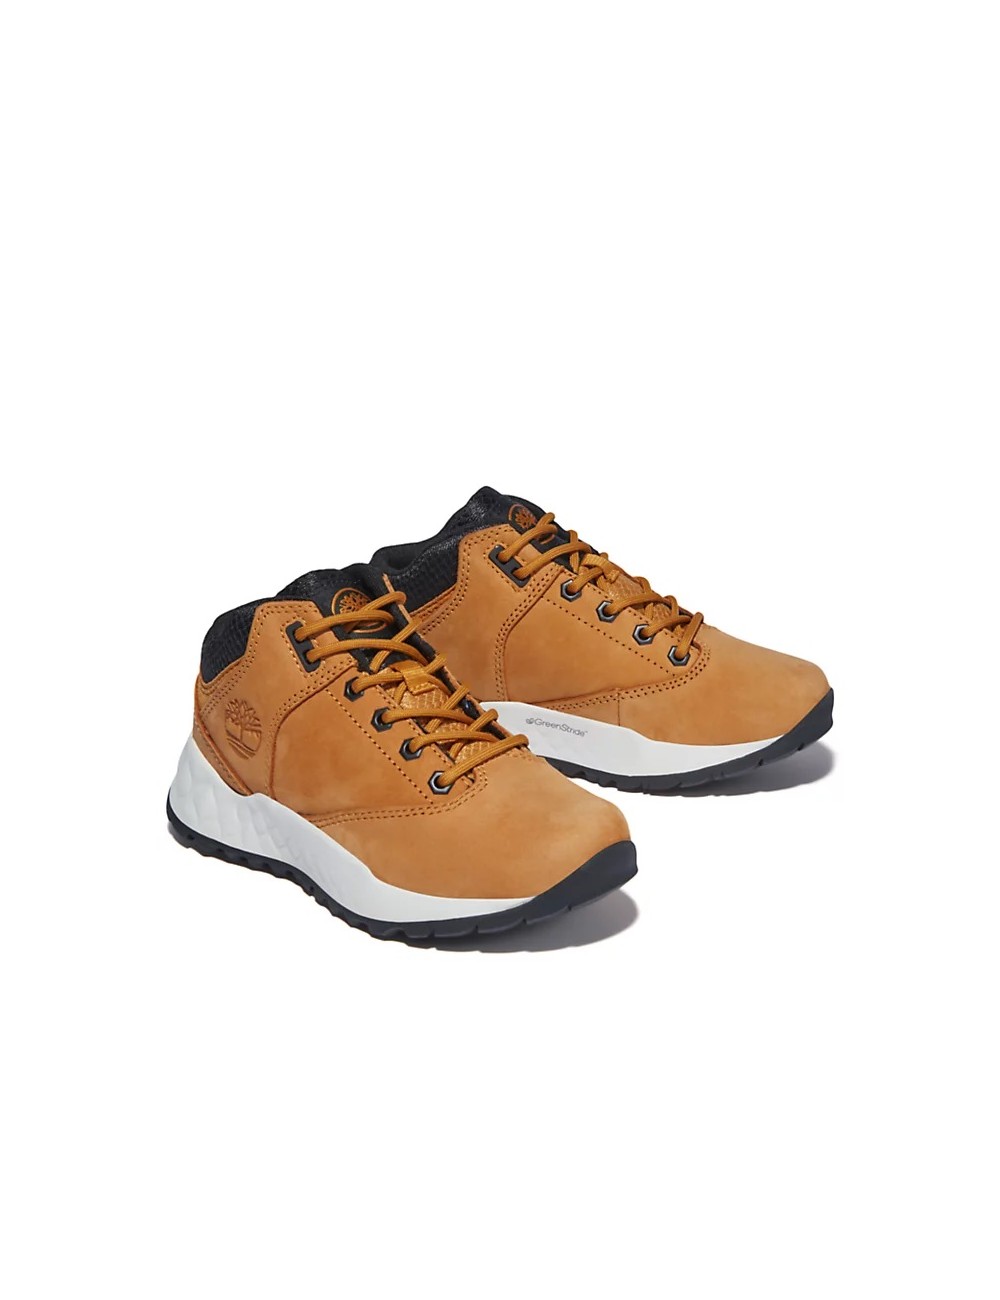 SNEAKERS MUJER SOLAR WAVE AMARILLO